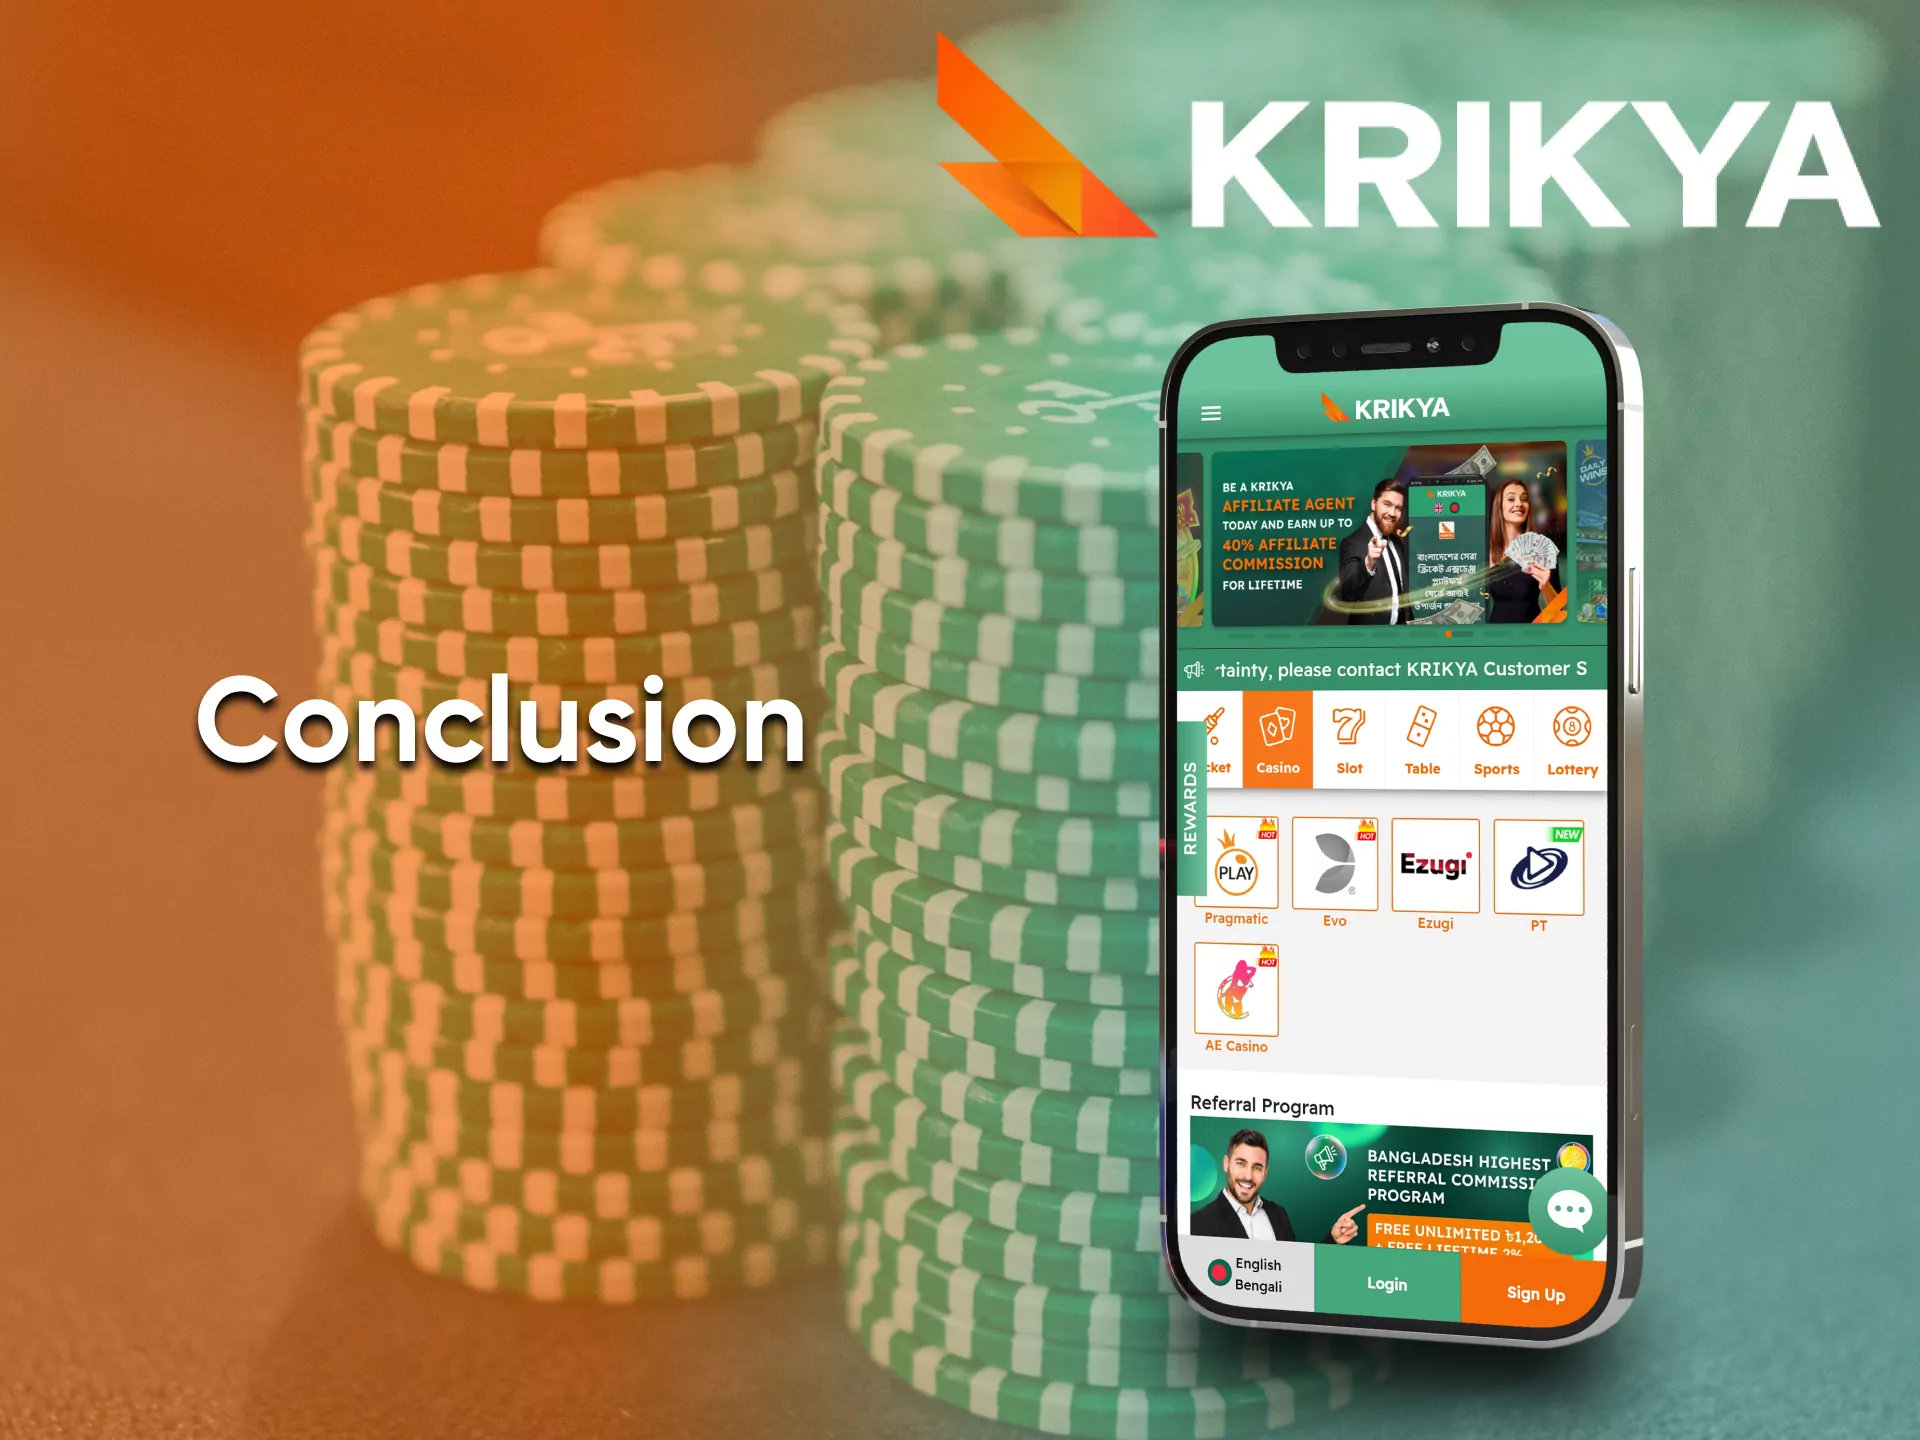 The Krikya app is the right choice for casino games.